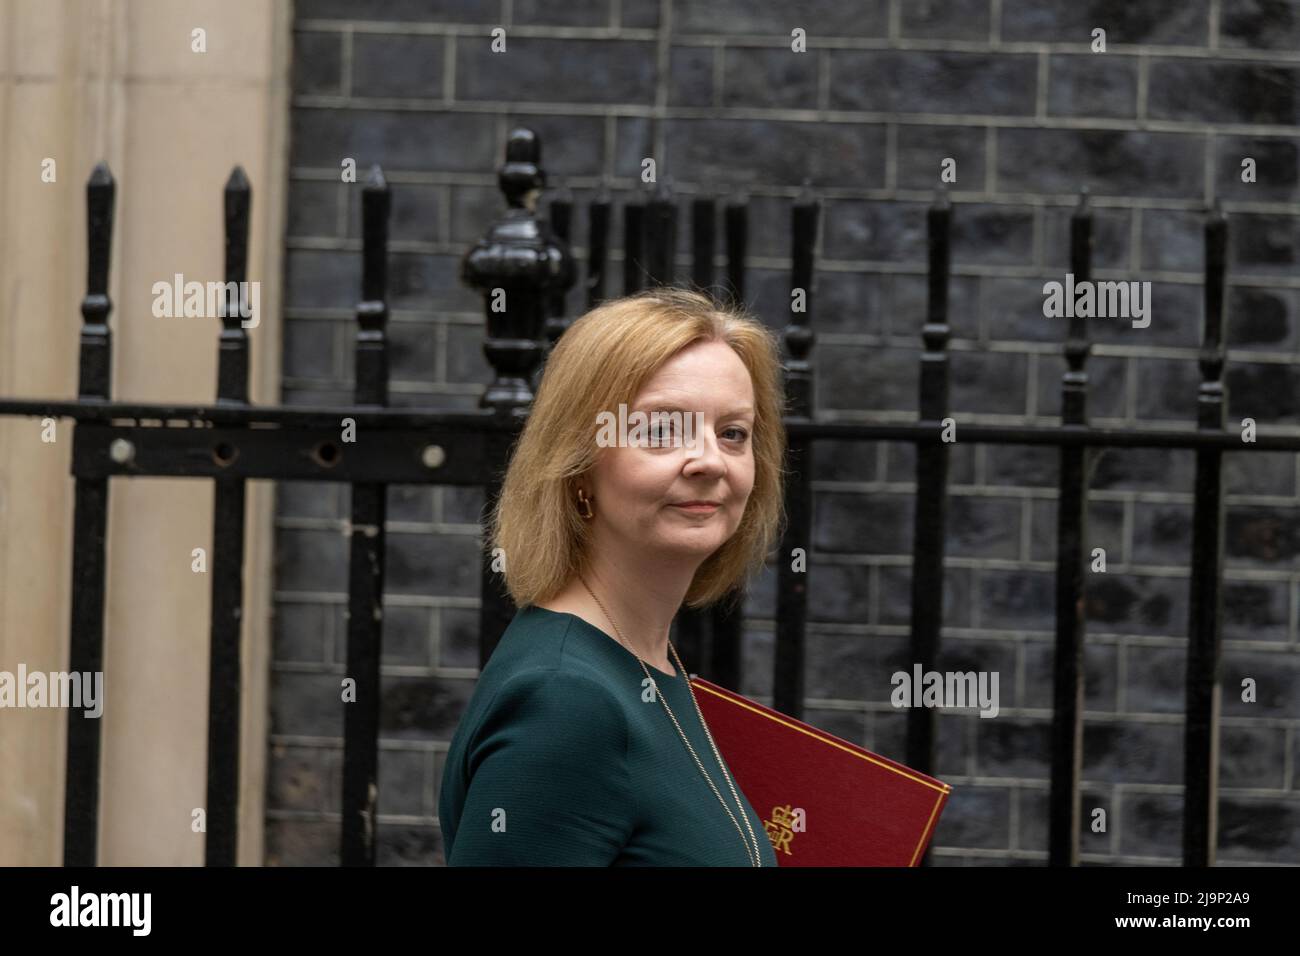 London, UK. 24th May, 2022. Liz Truss Foreign Secretary arrives at a cabinet meeting at 10 Downing Street London. The weekly UK cabinet meeting at 10 Downing Street, London UK chaired by the Prime Minister. Credit: SOPA Images Limited/Alamy Live News Stock Photo